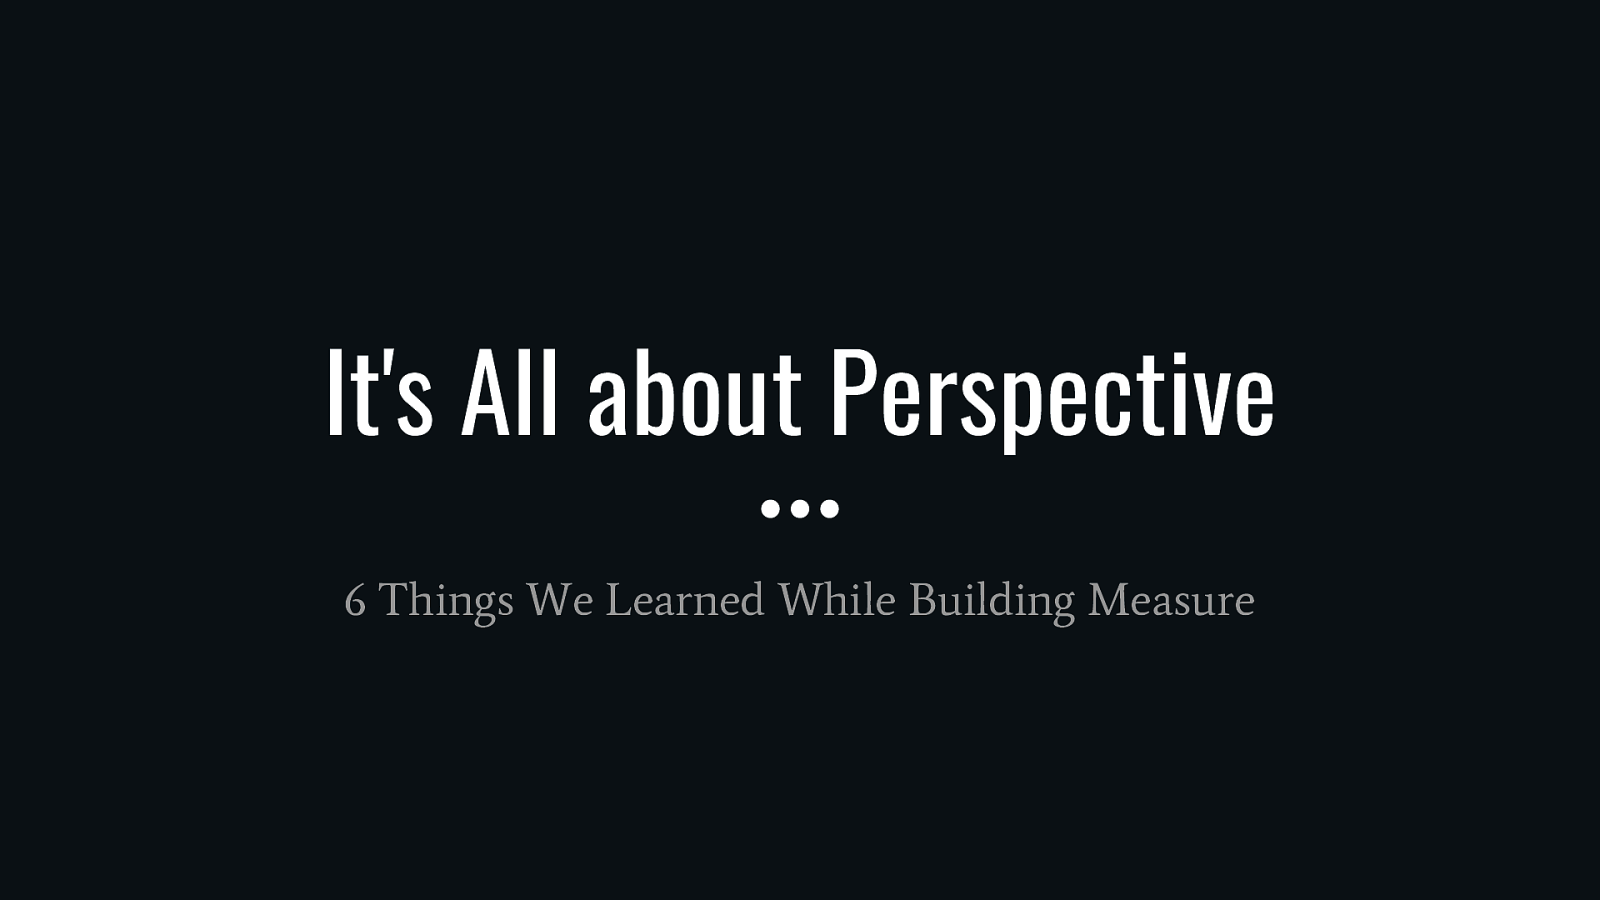 It's All about Perspective; 6 Things We Learned While Building Measure